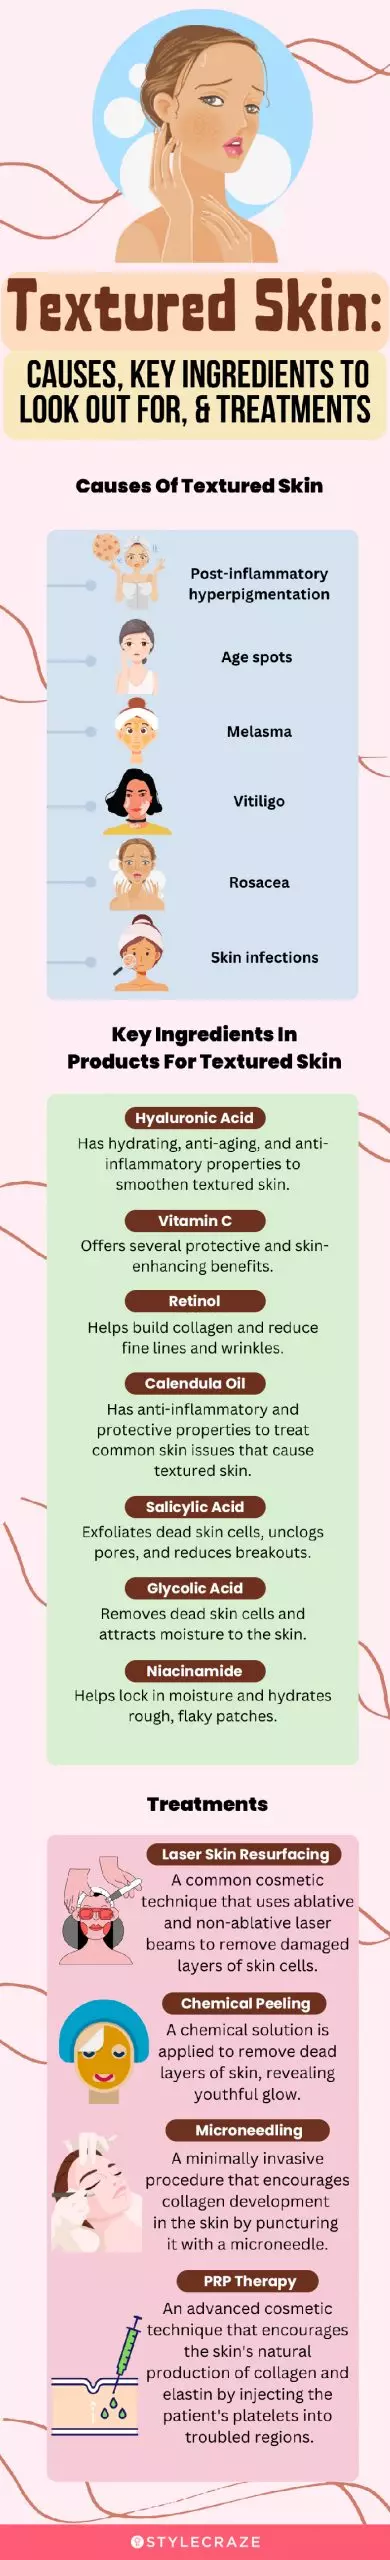 Textured Skin & Its Causes (infographic)